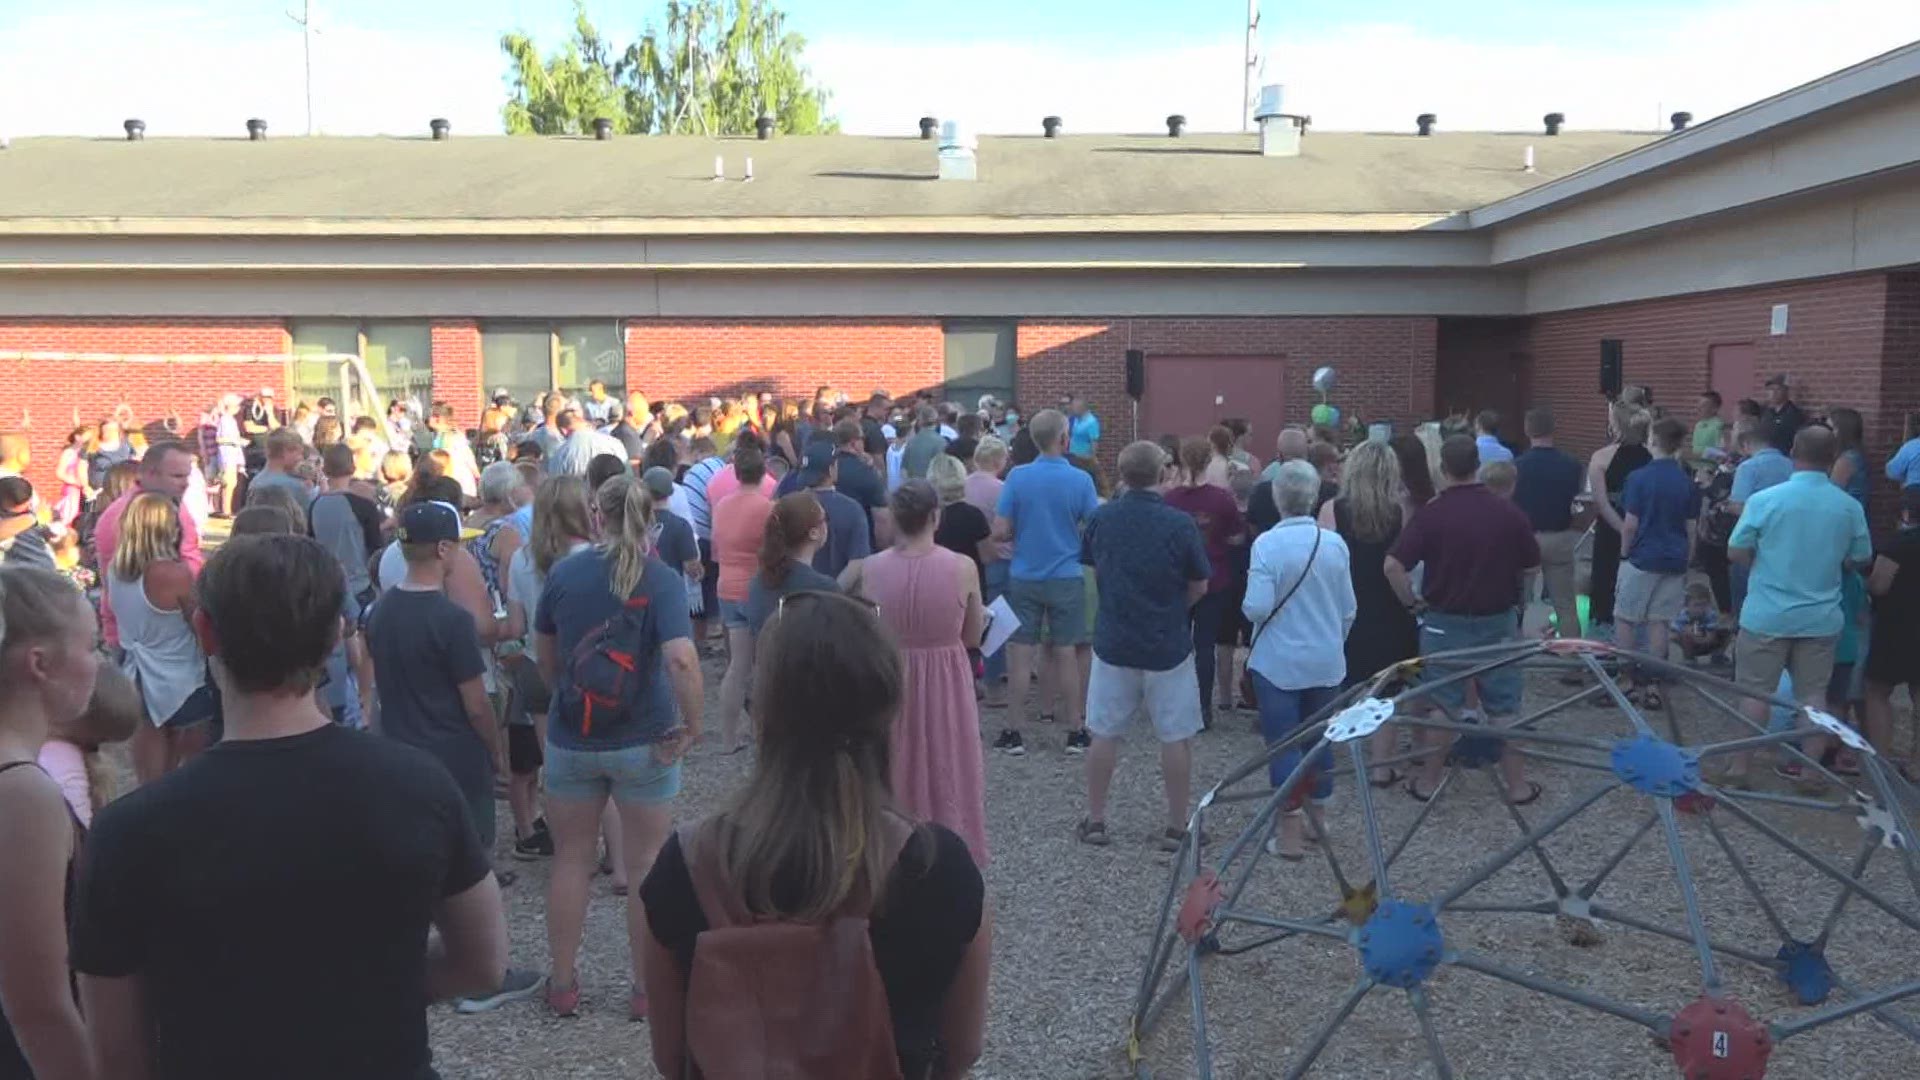 The community gathered Monday evening to remember and mourn Iain Rowe, who drowned in Lake Michigan over the weekend.